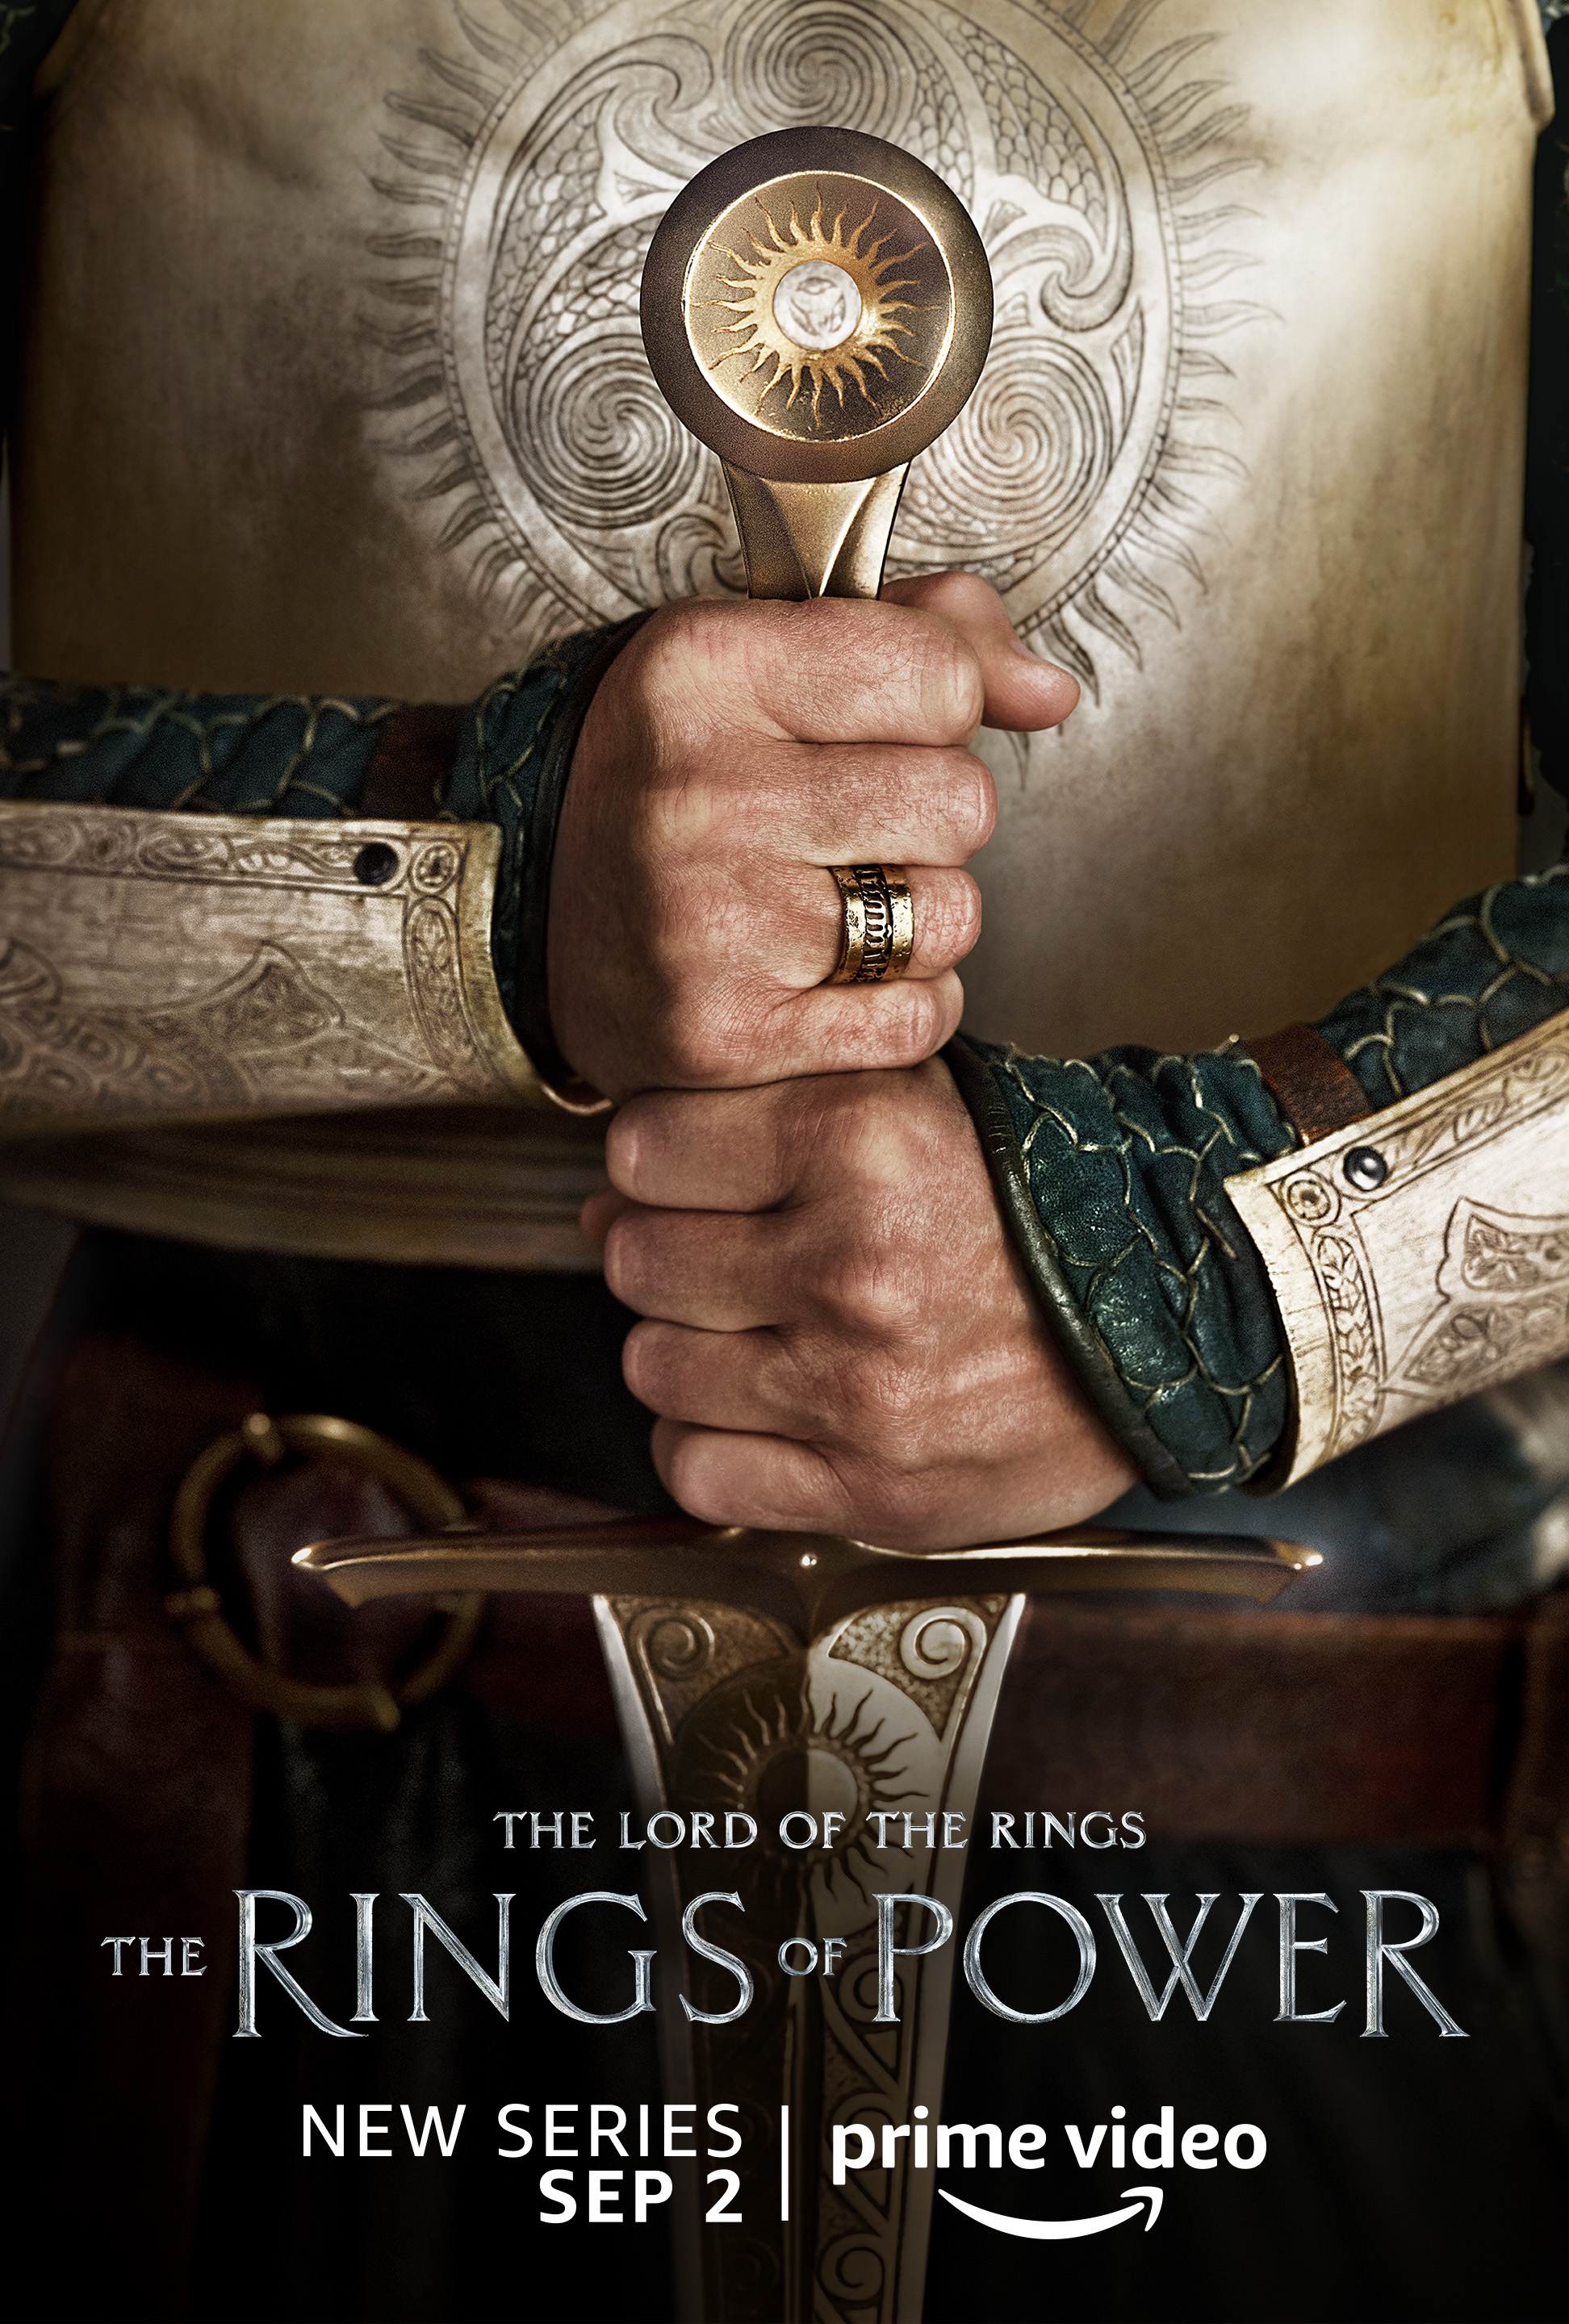 Pan prstenu: Prsteny moci / The Lord of the Rings: The Rings of Power S01E05 (CZ/EN)(2022)(WEB-DL)(1080p) = CSFD 66%